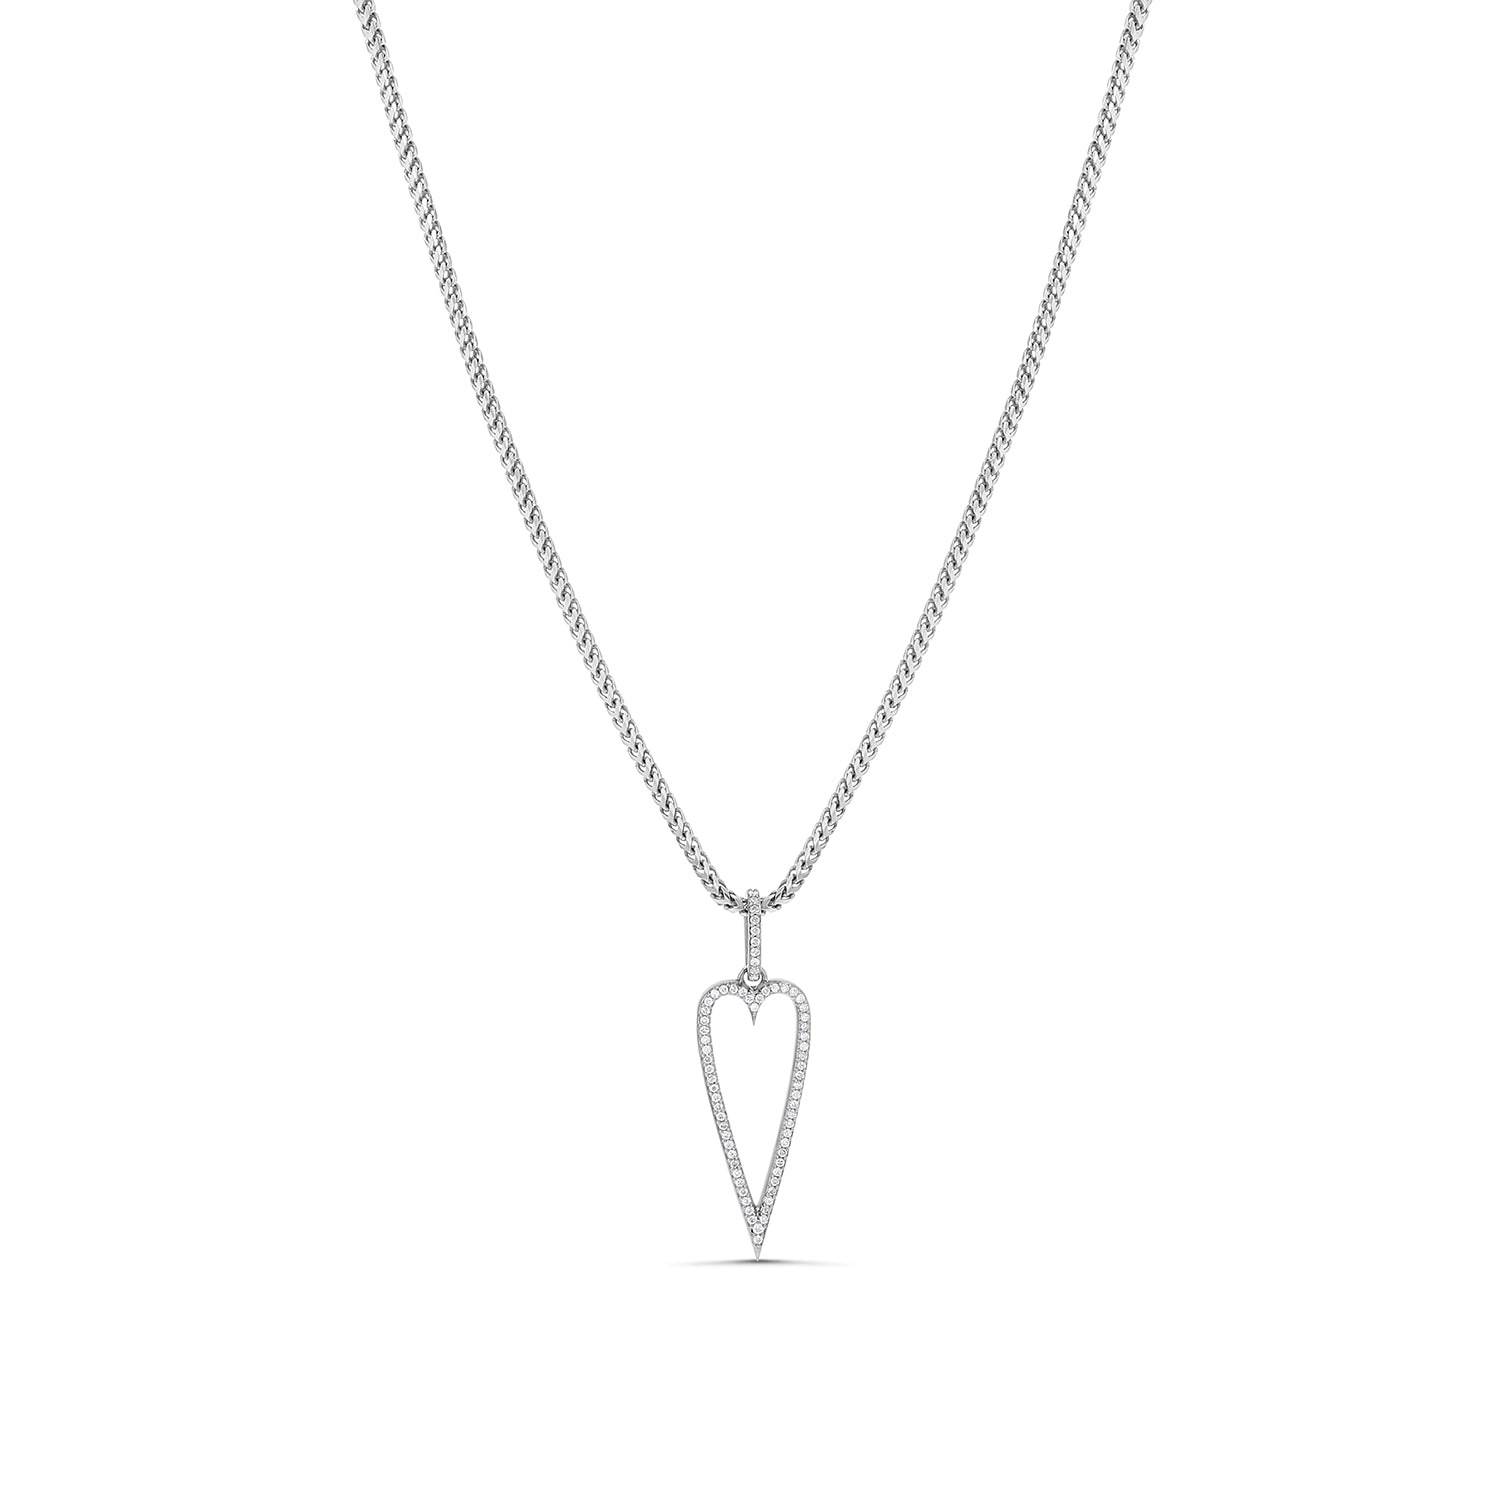 Double Sided Cut Out Diamond Heart Pendant